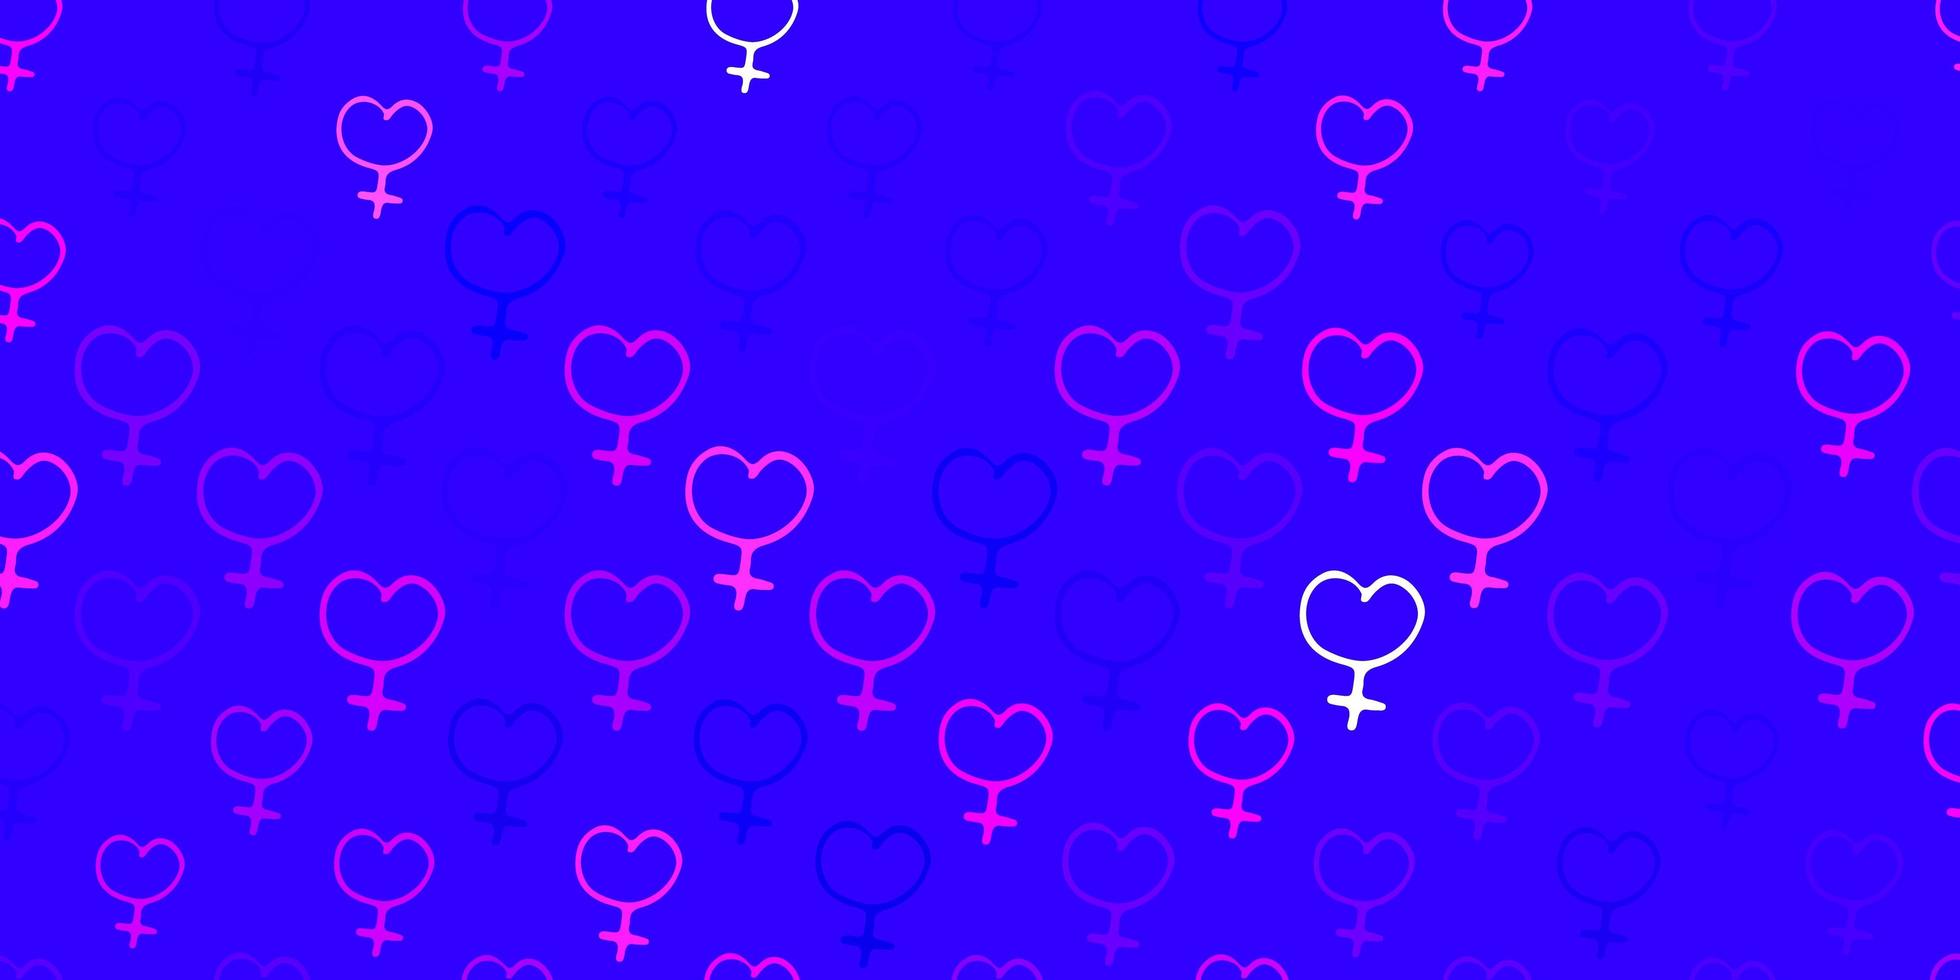 Light Purple, Pink vector backdrop with woman's power symbols.